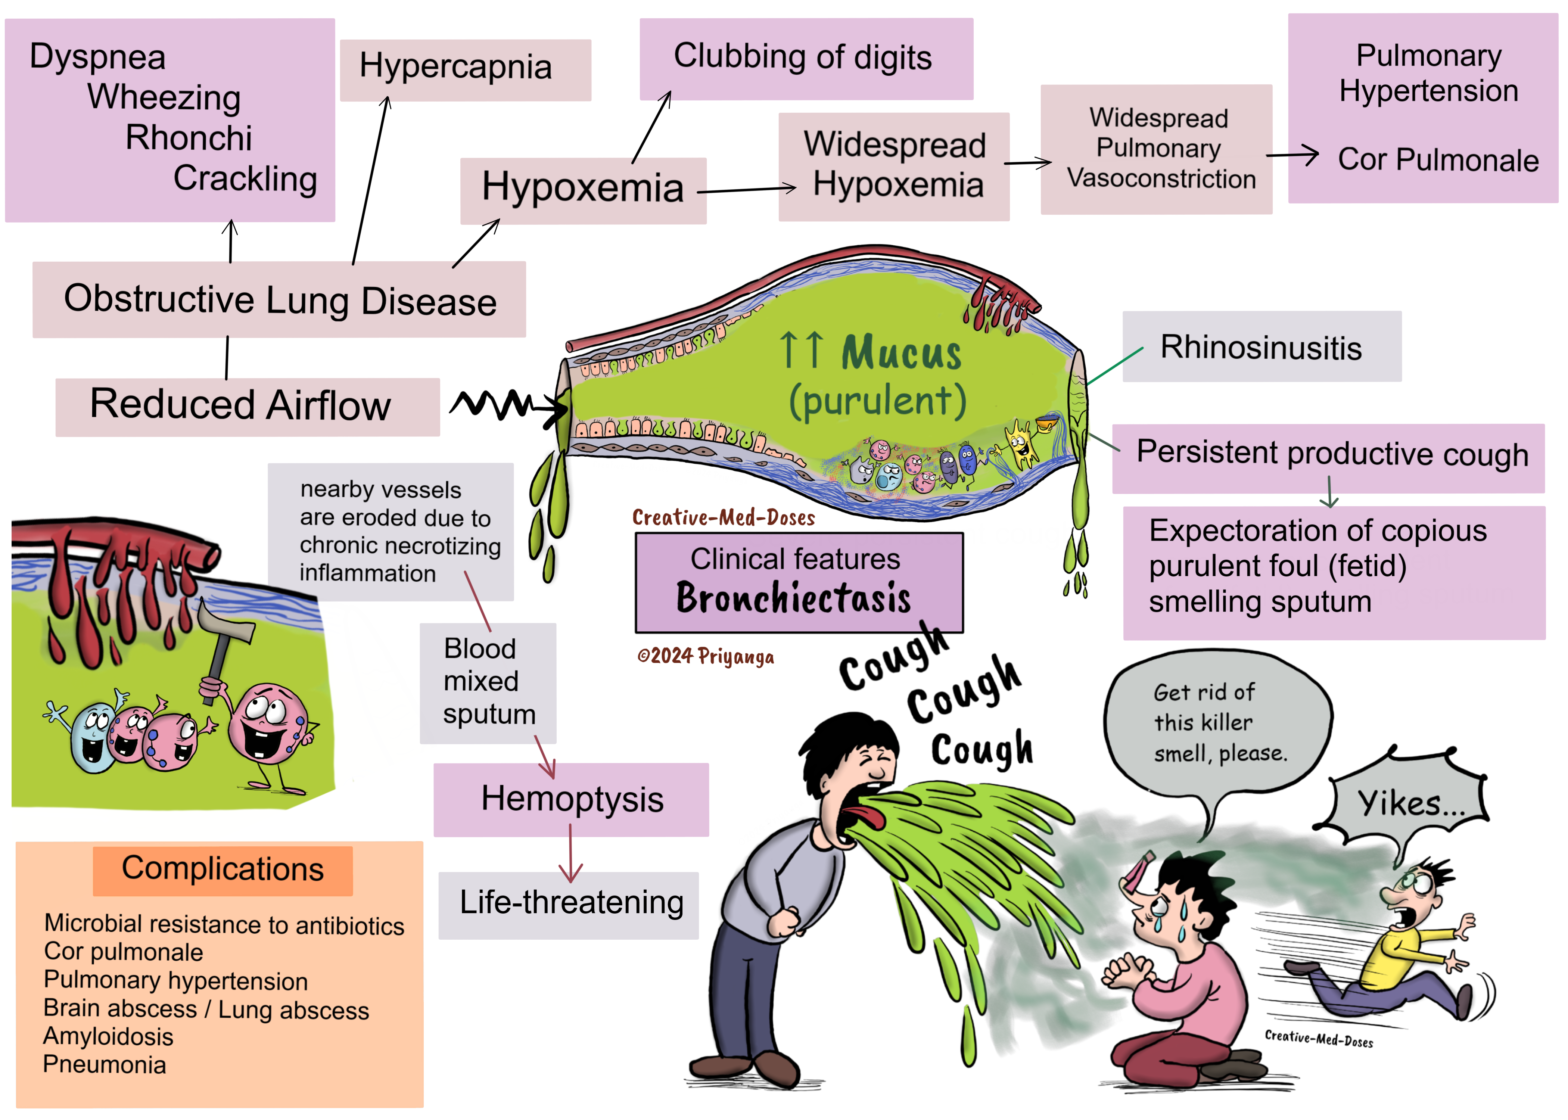 Bronchiectasis- clinical features